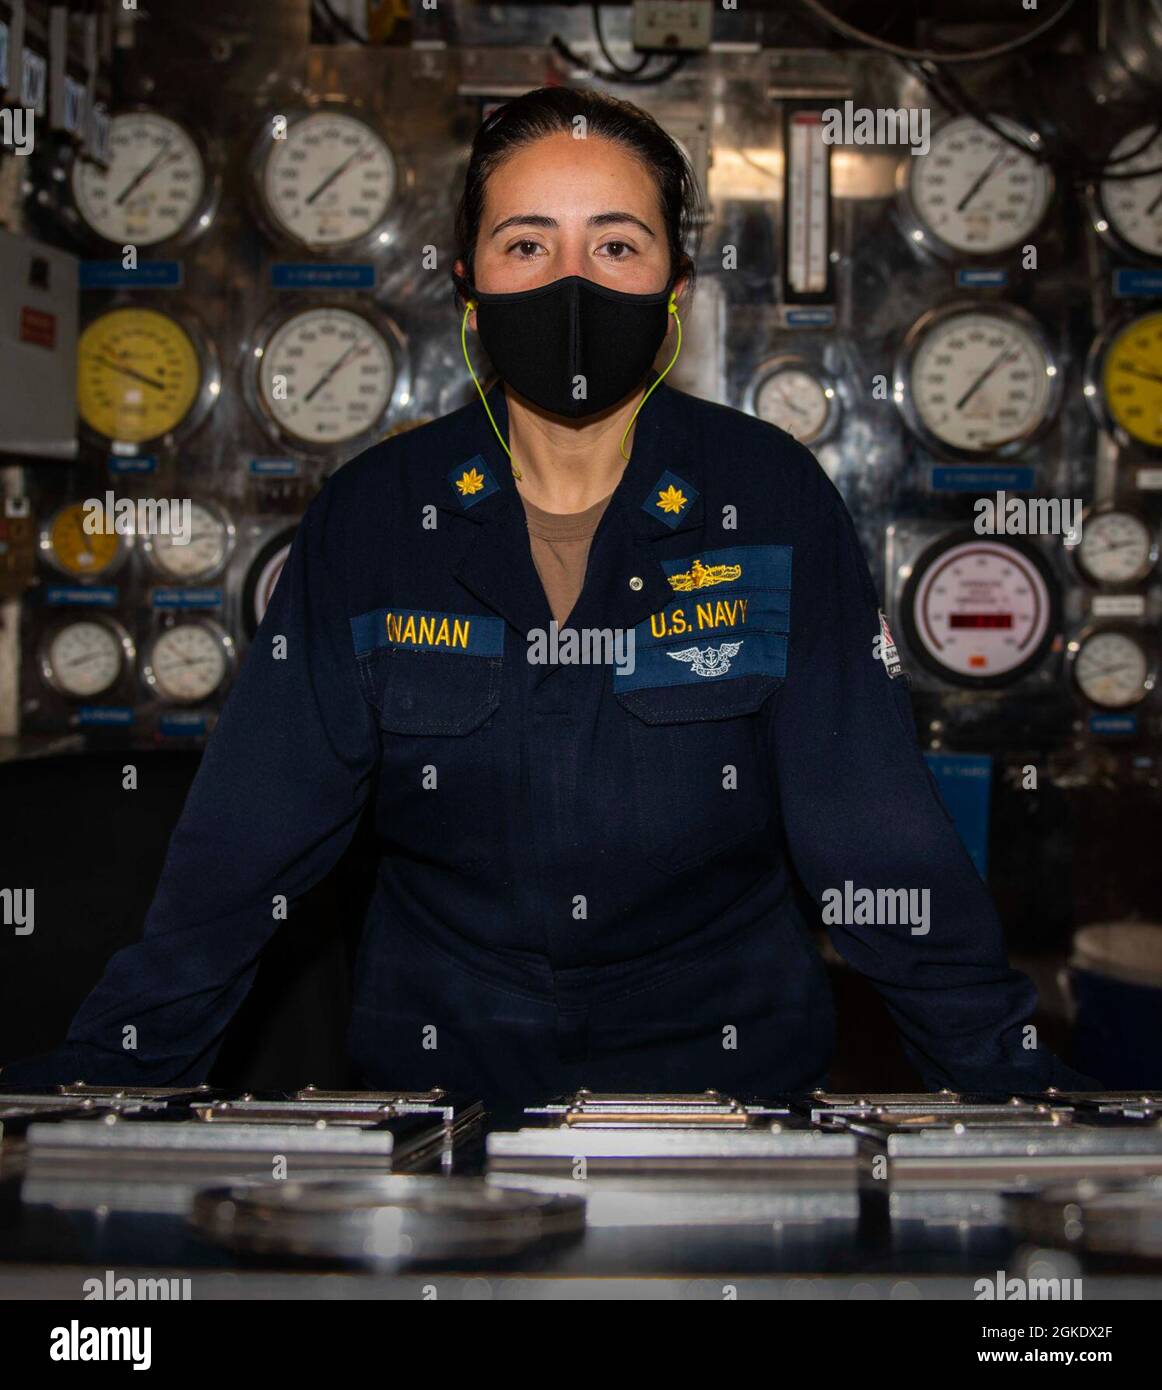 East China Sea (Mar. 24, 2021) -  Lt. Cmdr. Patricia Cunanan, from Manila, Philippines, a chief engineering (CHENG) officer poses for a photograph in the fire room aboard U.S. 7th Fleet flagship USS Blue Ridge's (LCC 19)Blue Ridge. Cunanan enlisted in the Navy as a boiler technician in December 1994, then later commissioned through the Limited Duty Officer program. She is currently assigned aboard Blue Ridge as the first female CHENG. Blue Ridge is the oldest operational ship in the Navy and, as 7th Fleet command ship, actively works to foster relationships with allies and partners in the Indo Stock Photo